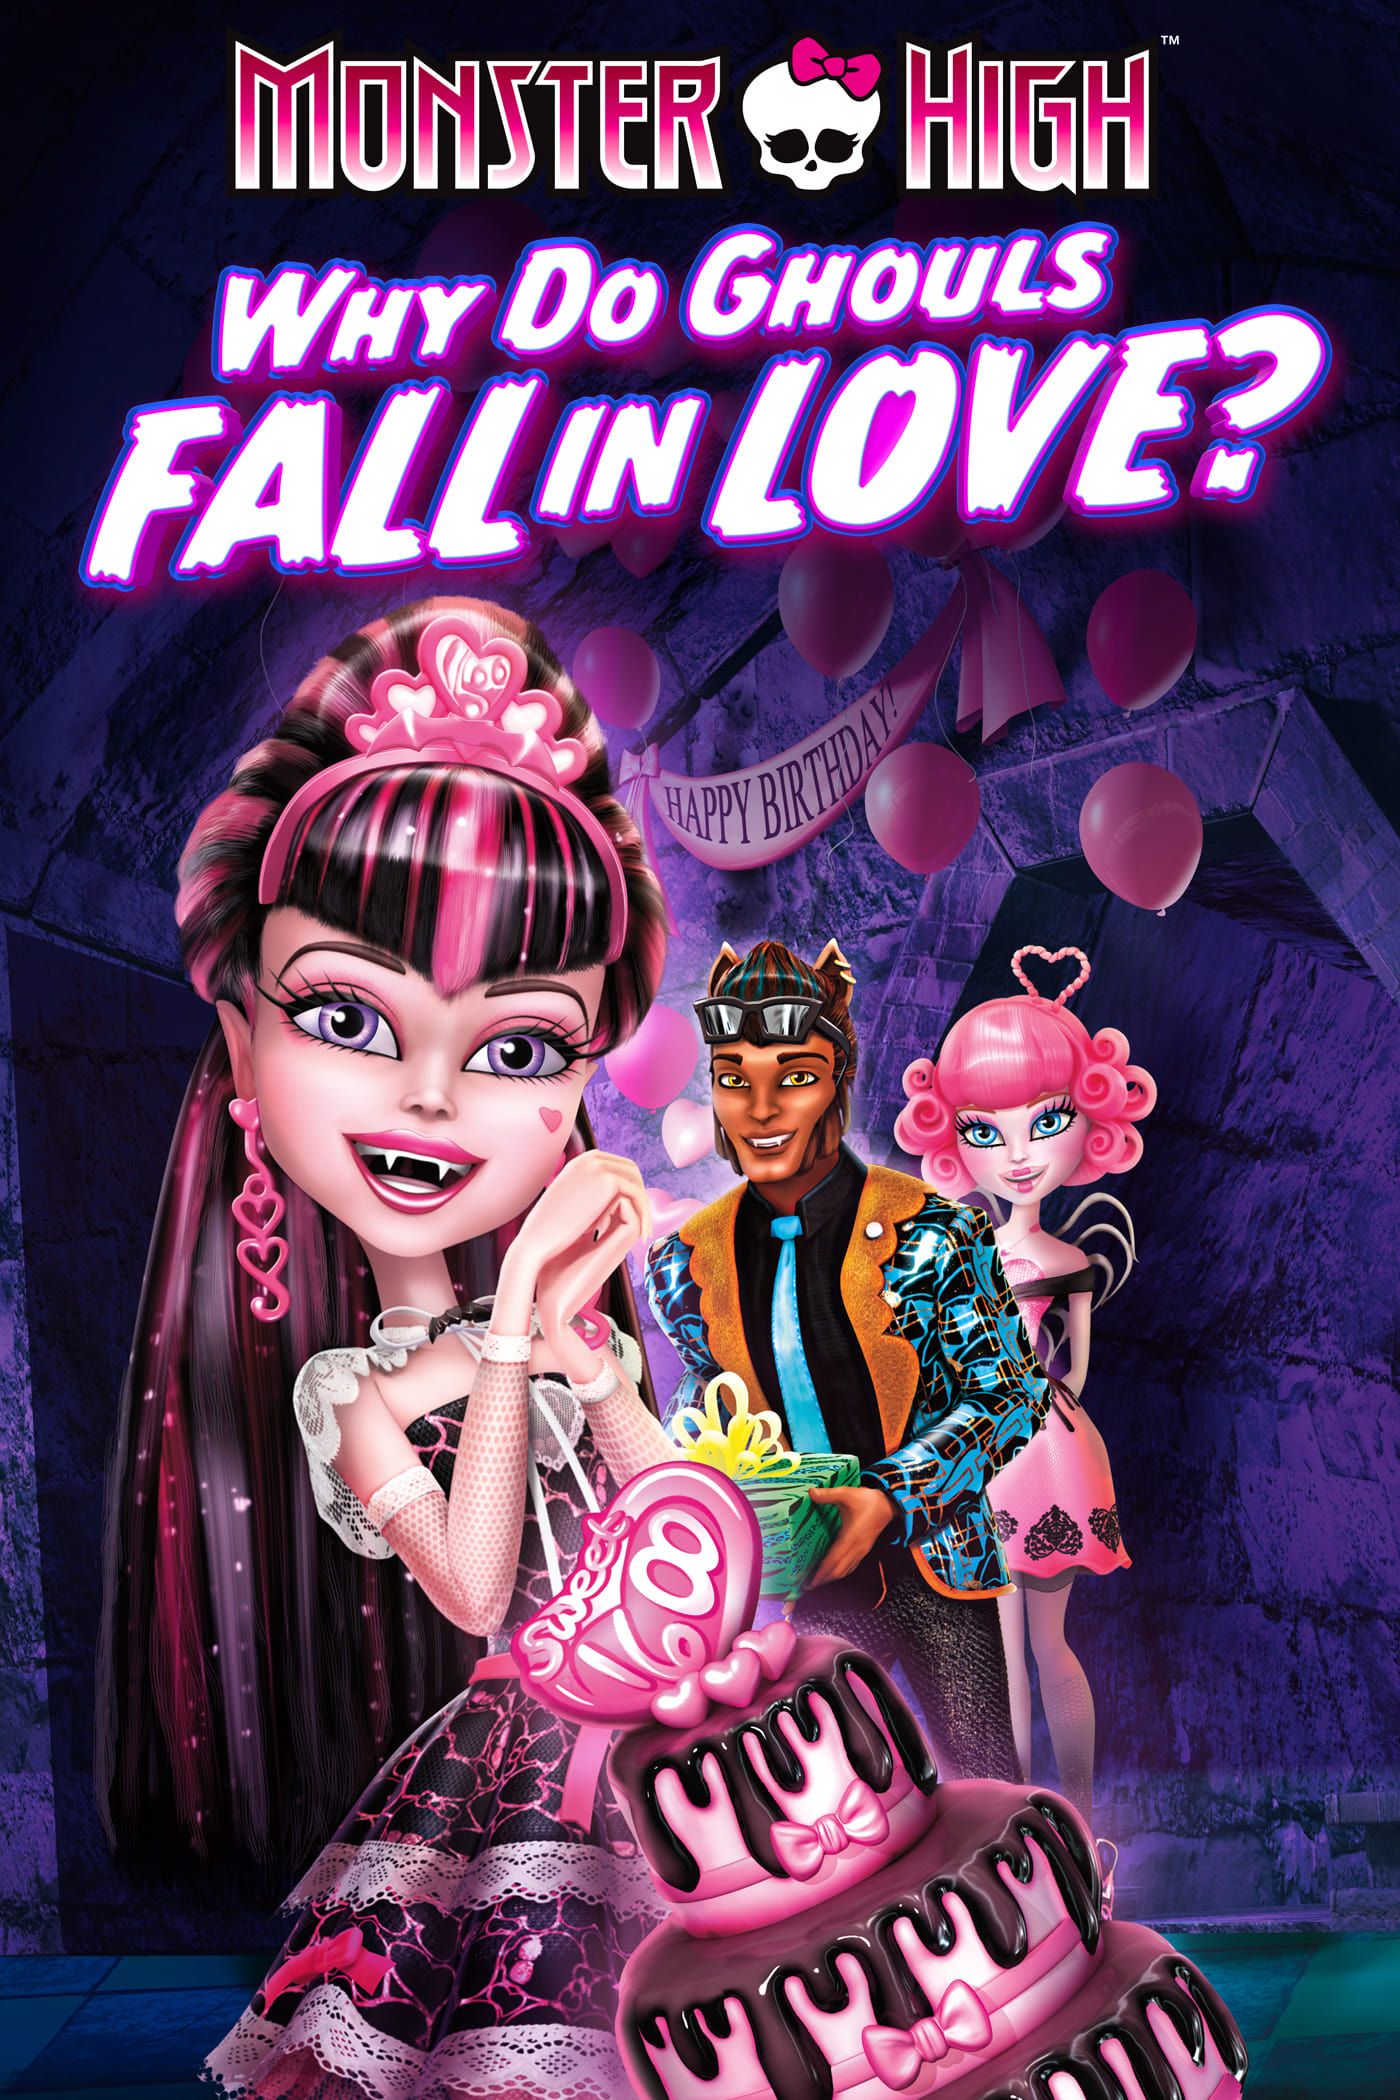 Watch Monster High: The Movie